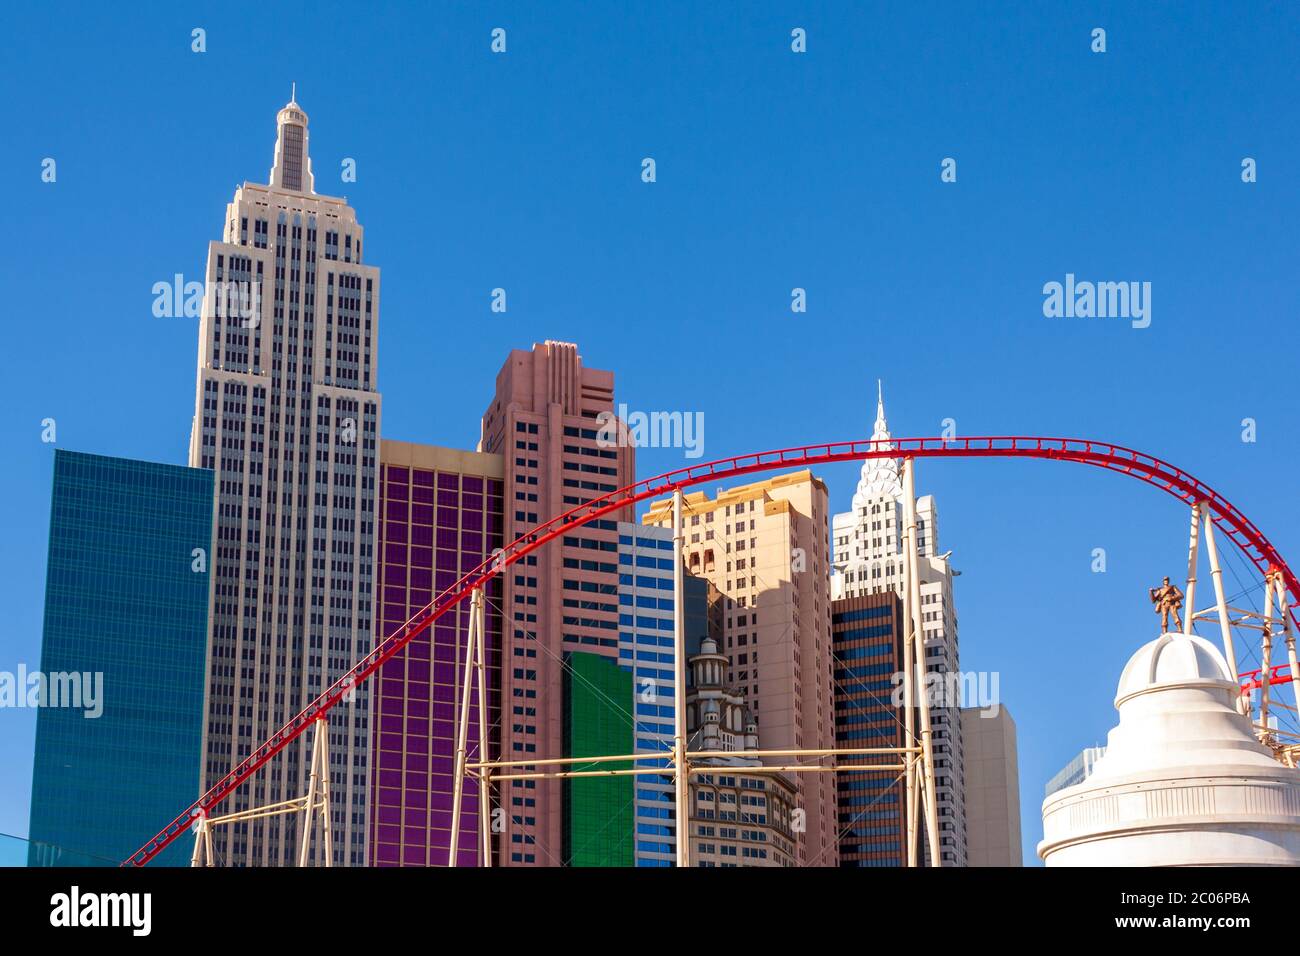 Las Vegas, NV / USA - February 27 2019: Located on the Las Vegas Strip, New York - New York Hotel and Casino features a rollercoaster and replicas of Stock Photo